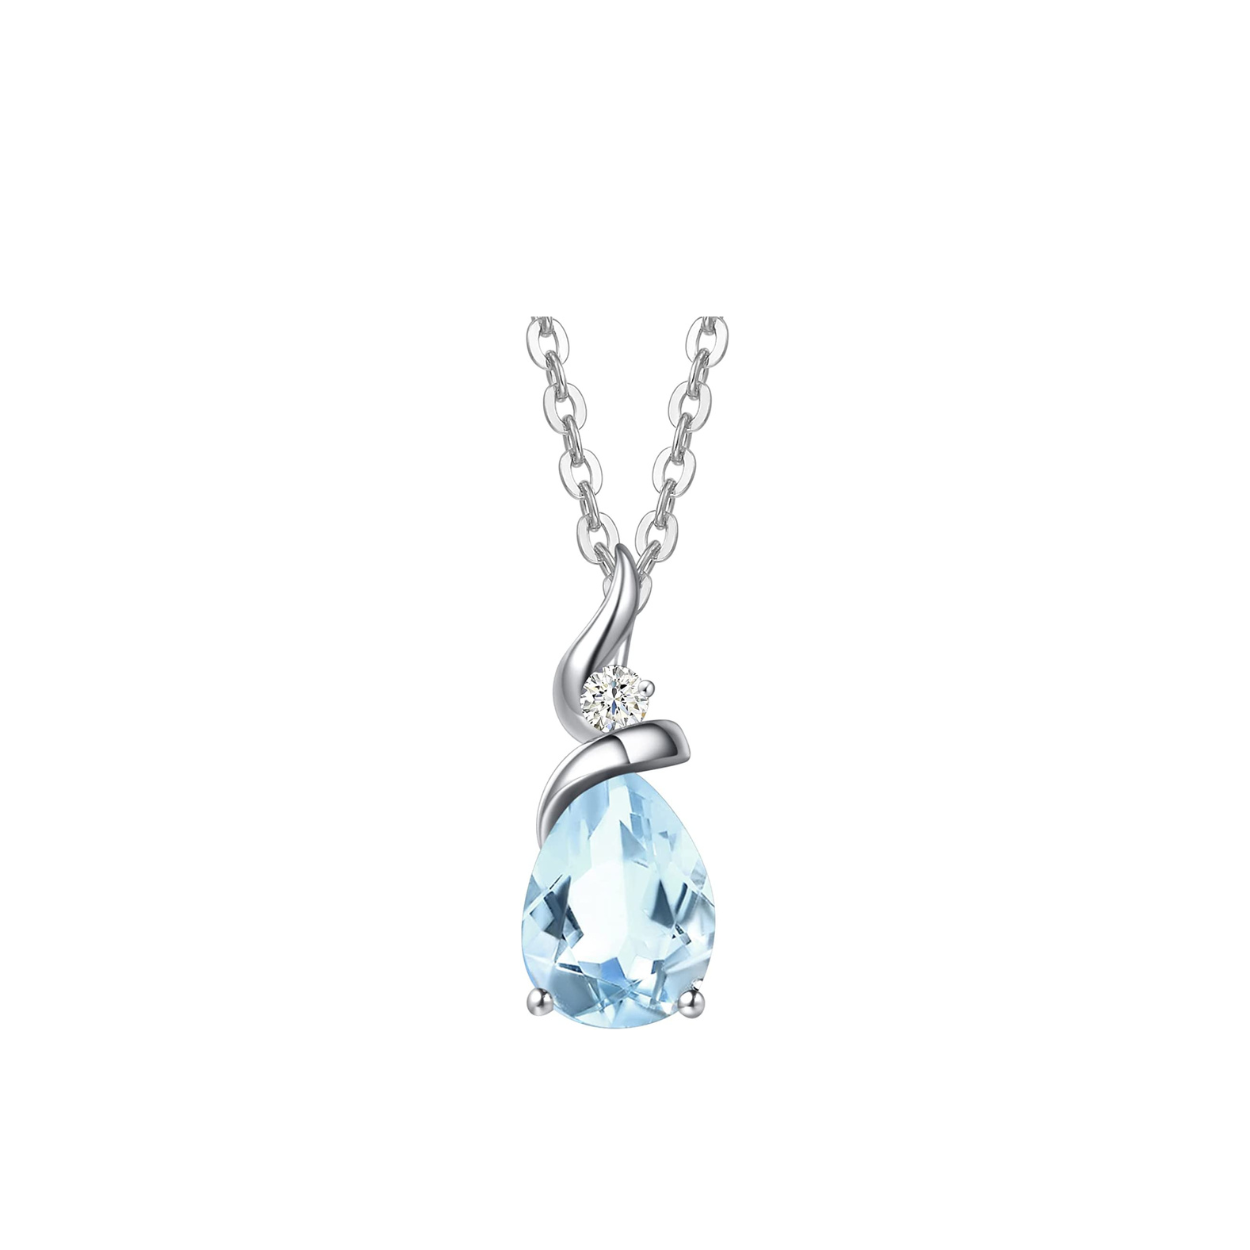 FANCIME "Ribbon" Aquamarine March Gemstone Sterling Silver Necklace Main